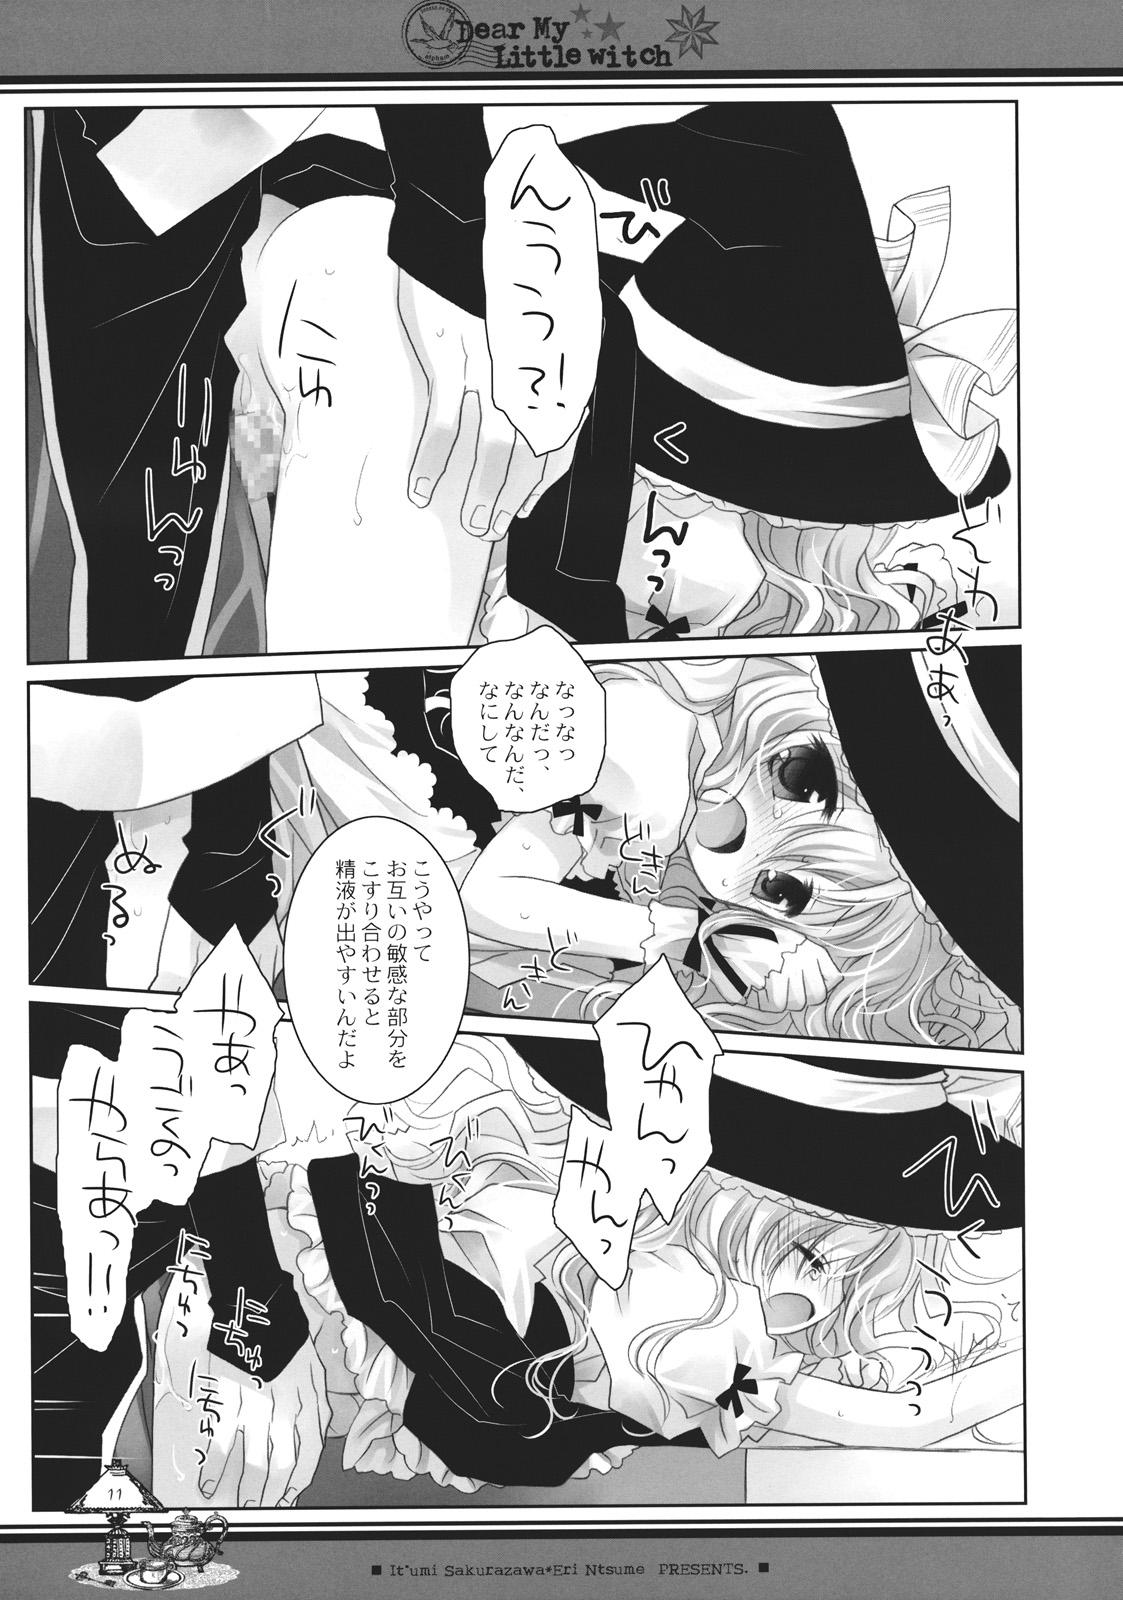 Footworship Dear My Little Witch - Touhou project Femdom Pov - Page 11